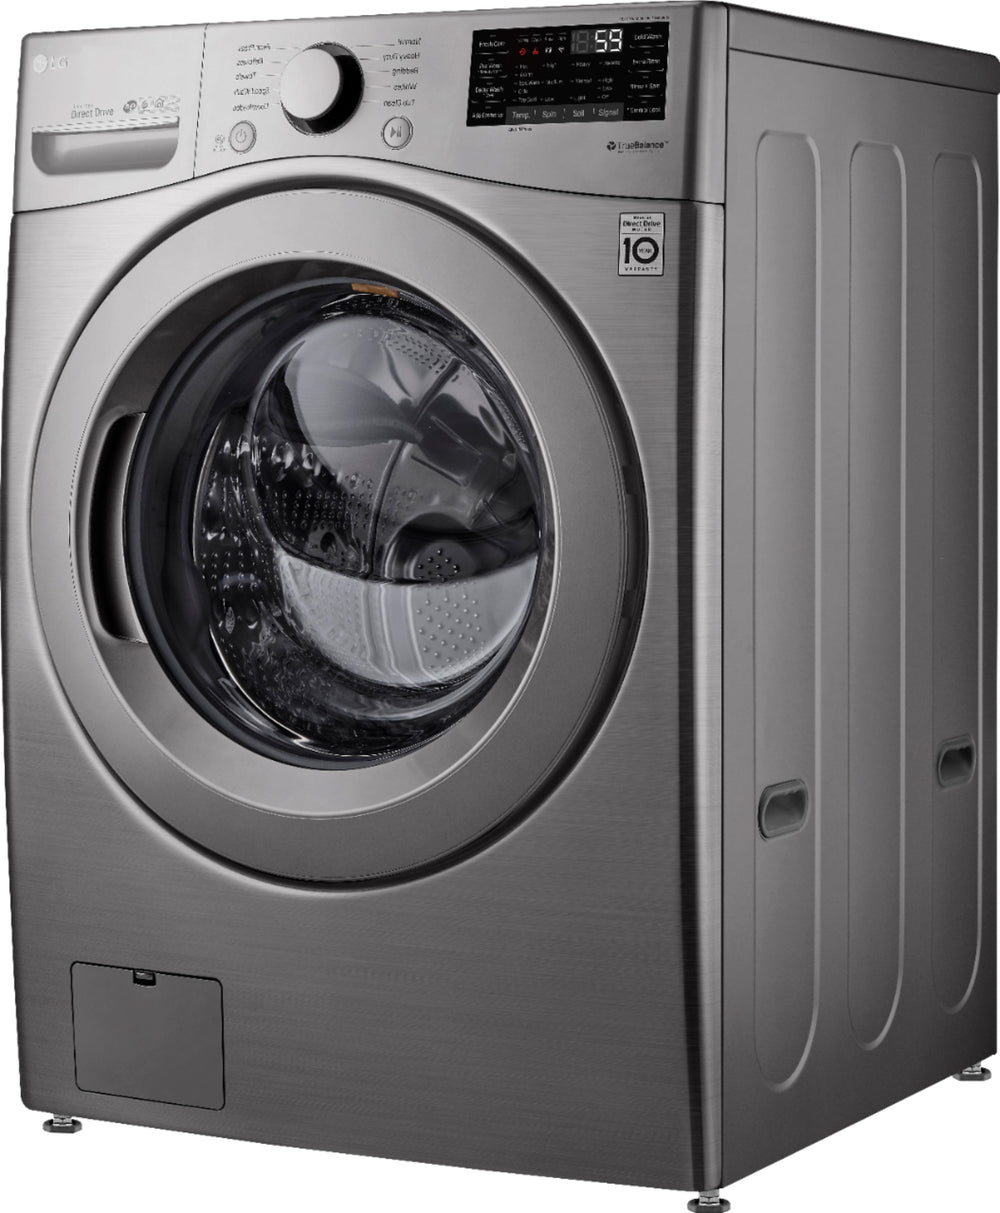 LG - 4.5 Cu. Ft. 10-Cycle High-Efficiency Front Load Washer with 6Motion Technology - Graphite Steel_2